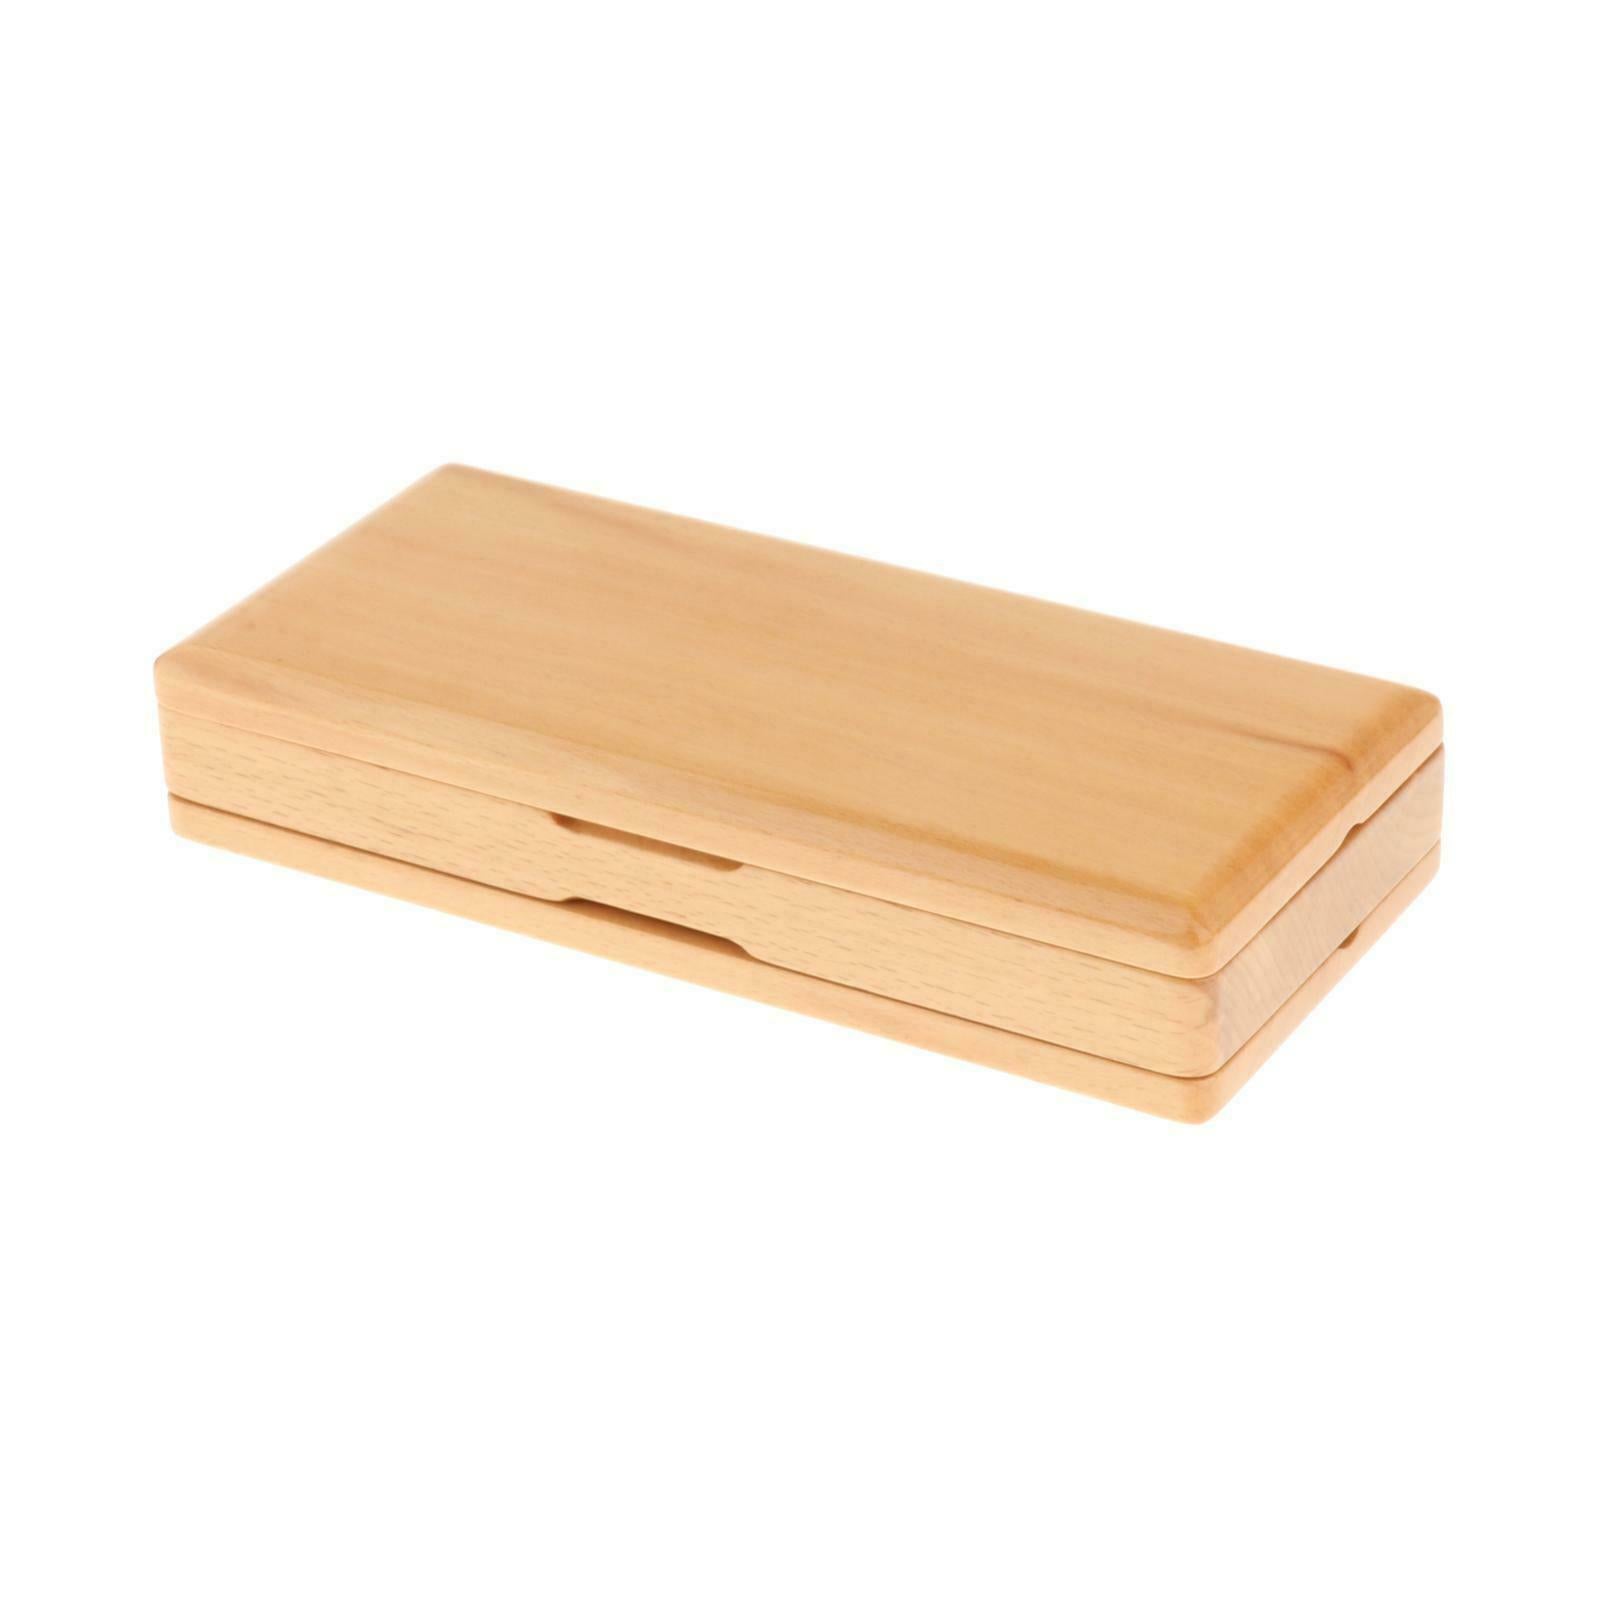 Portable Oboe Reed Case Wooden for Bassoon Reeds 40pcs Capacity 20x9.3x3.7cm